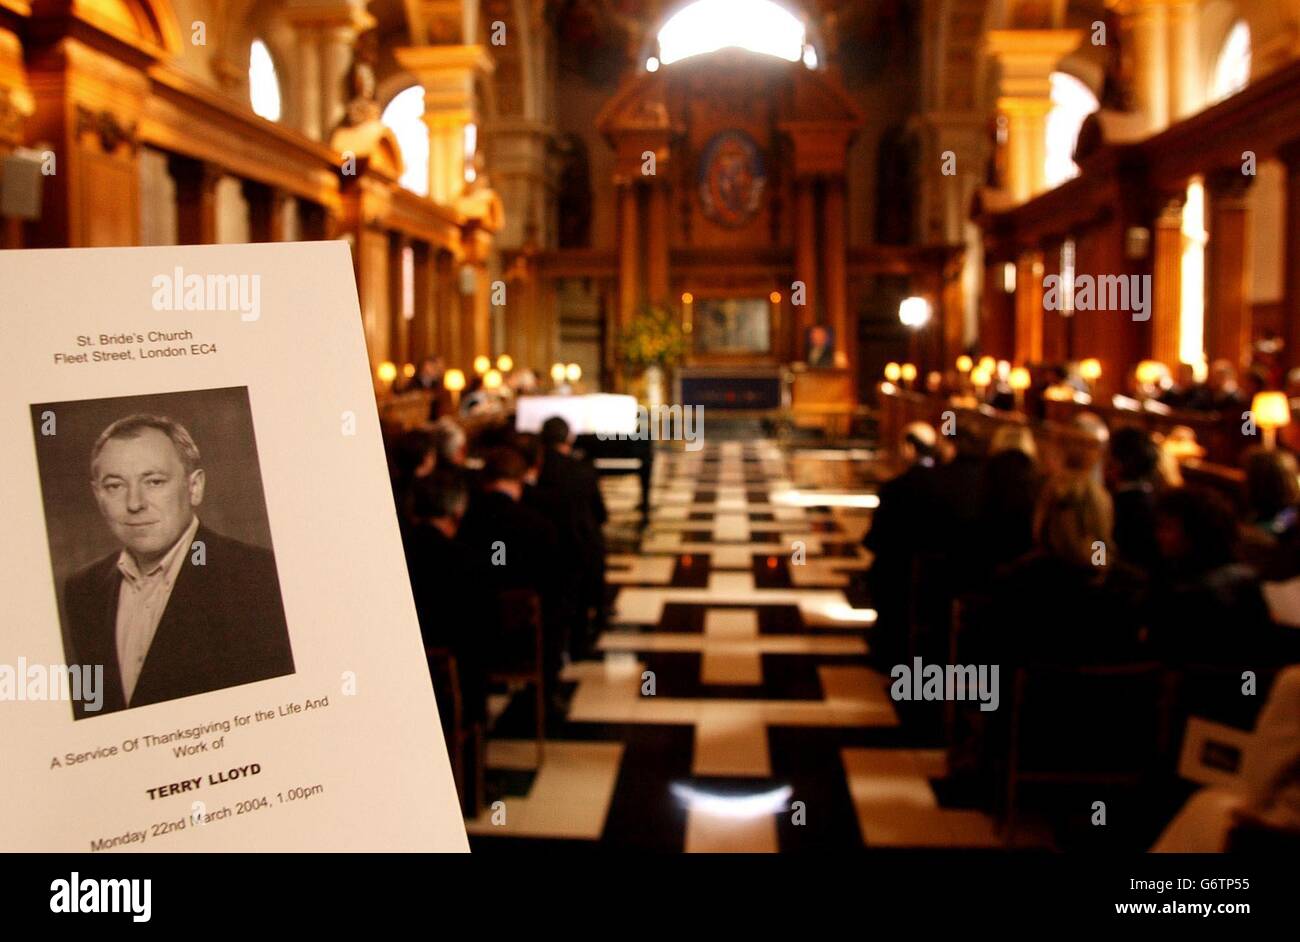 The interior of St Brides Church, Fleet Street, London, where a special service was held for ITV journalist Terry Lloyd, to celebrate his life and work. Stock Photo